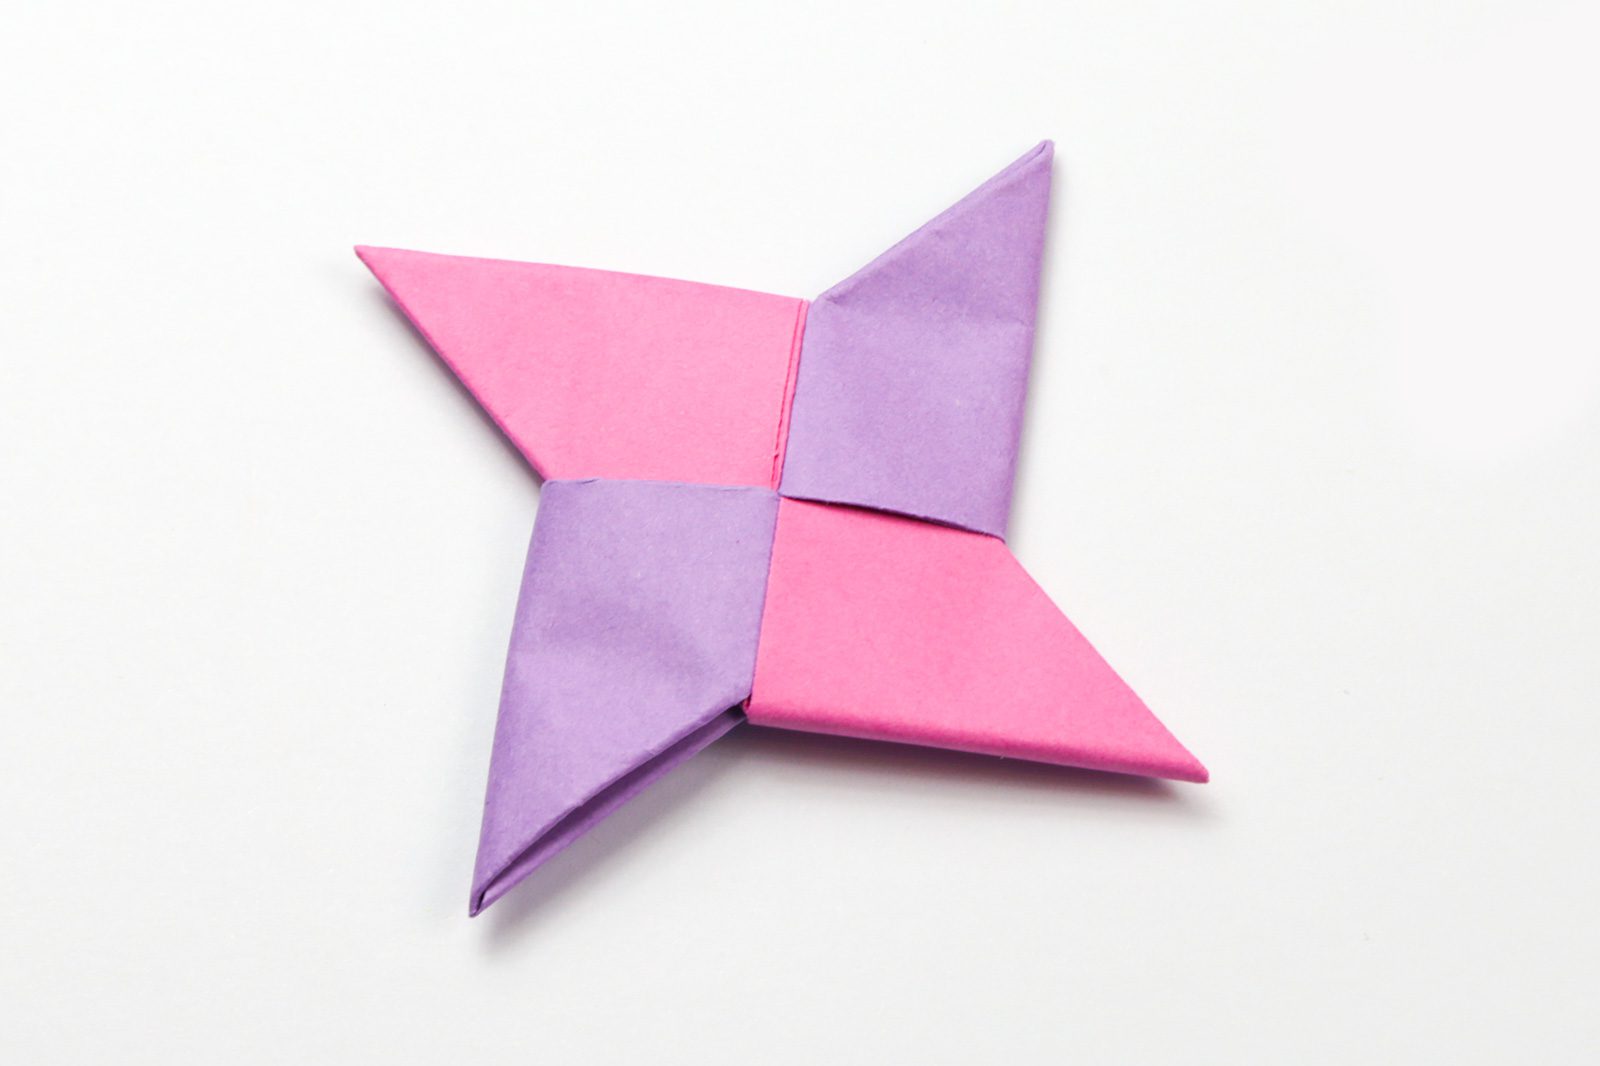 Origami Paper Star Tutorial, Learn how to fold a paper star in this cute  origami paper star tutorial. Follow the step by step paper folding  instructions for this easy origami paper